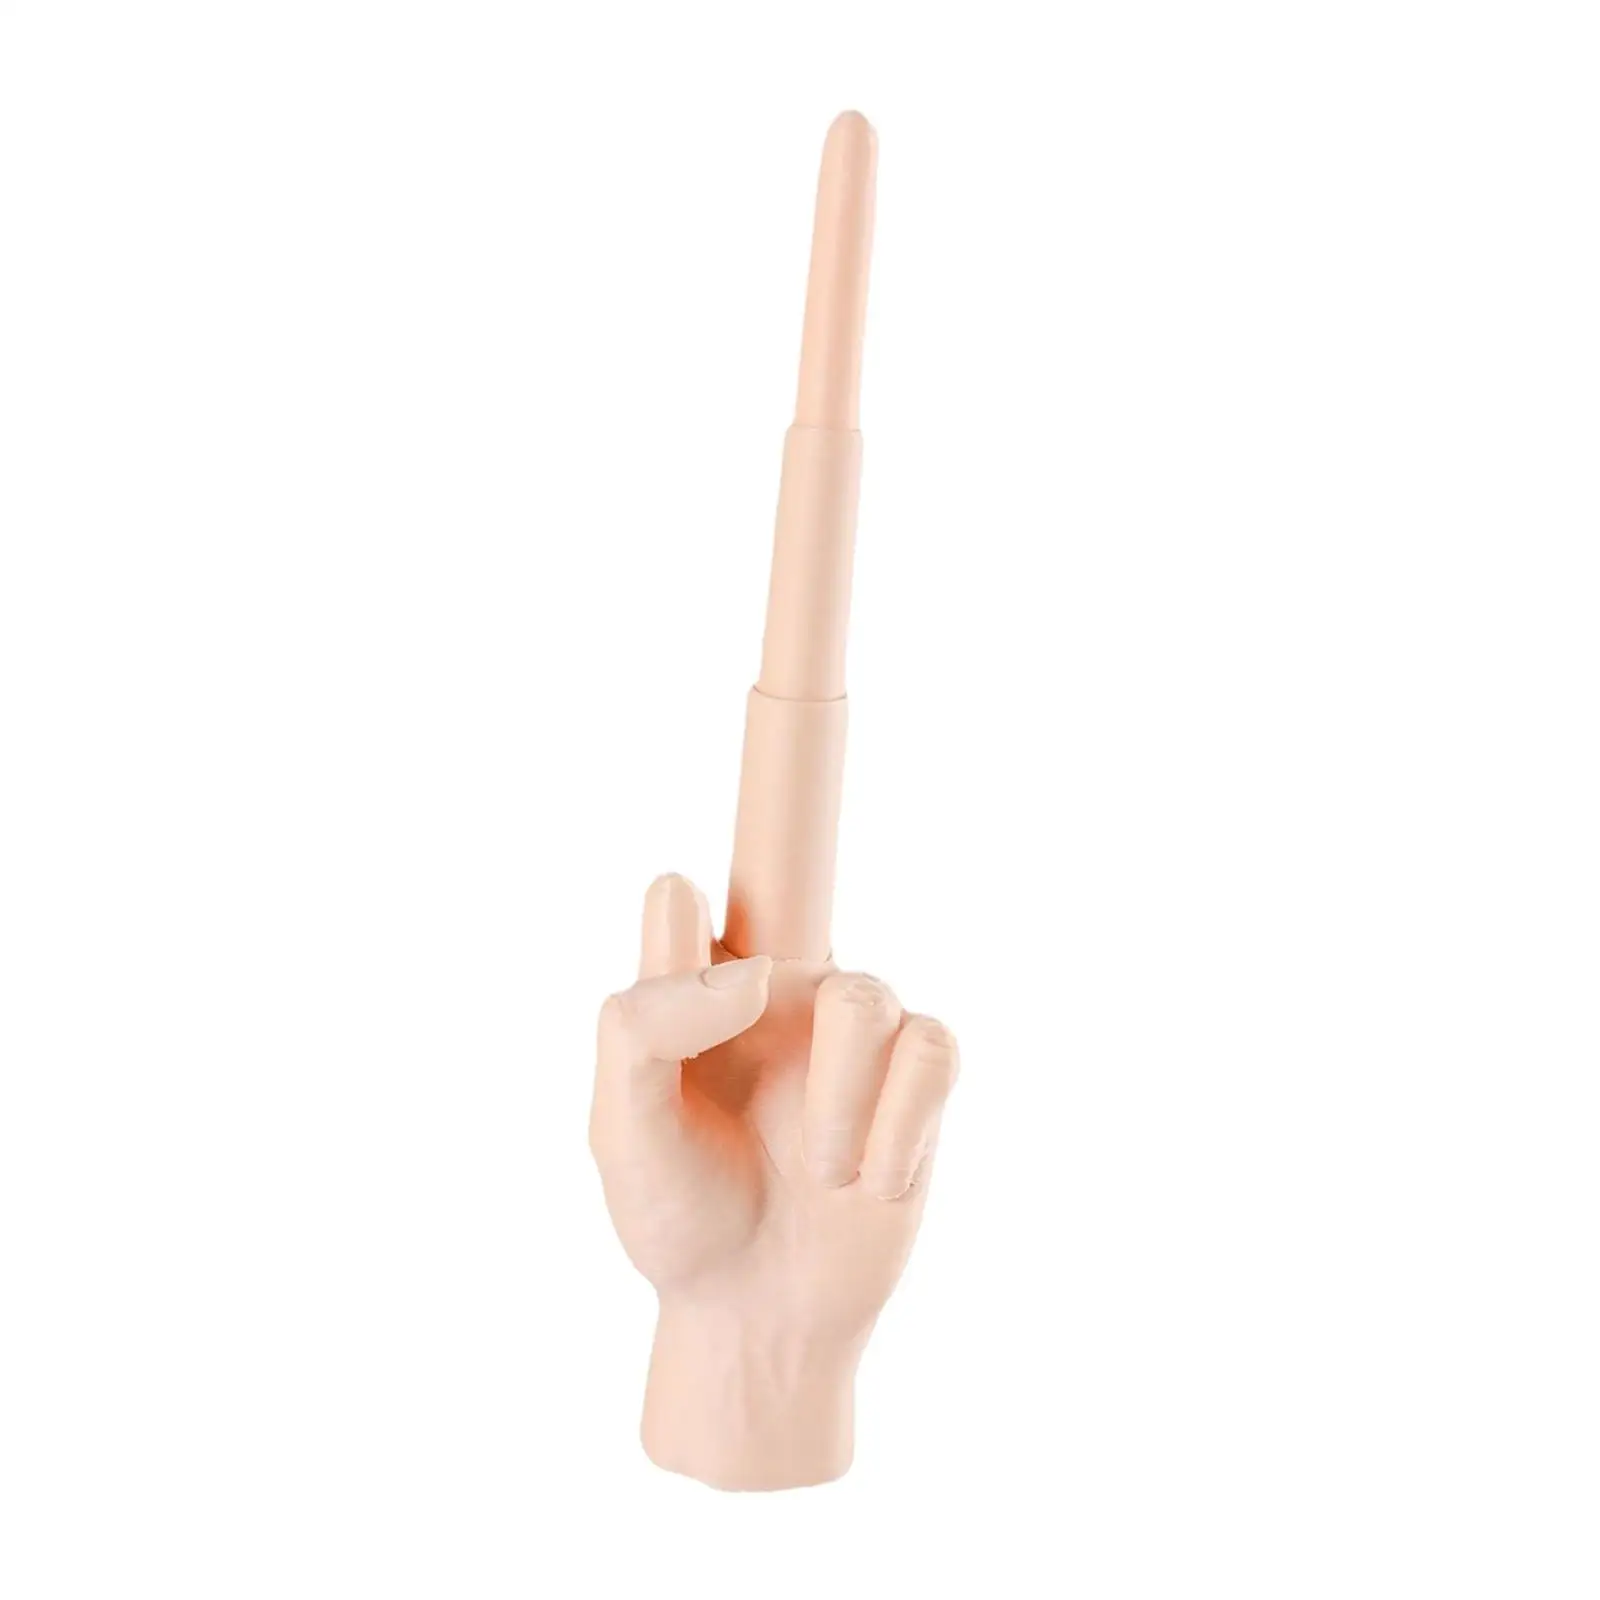 Novelty Middle Finger Toy, Creative 3D Printing for Festivals,